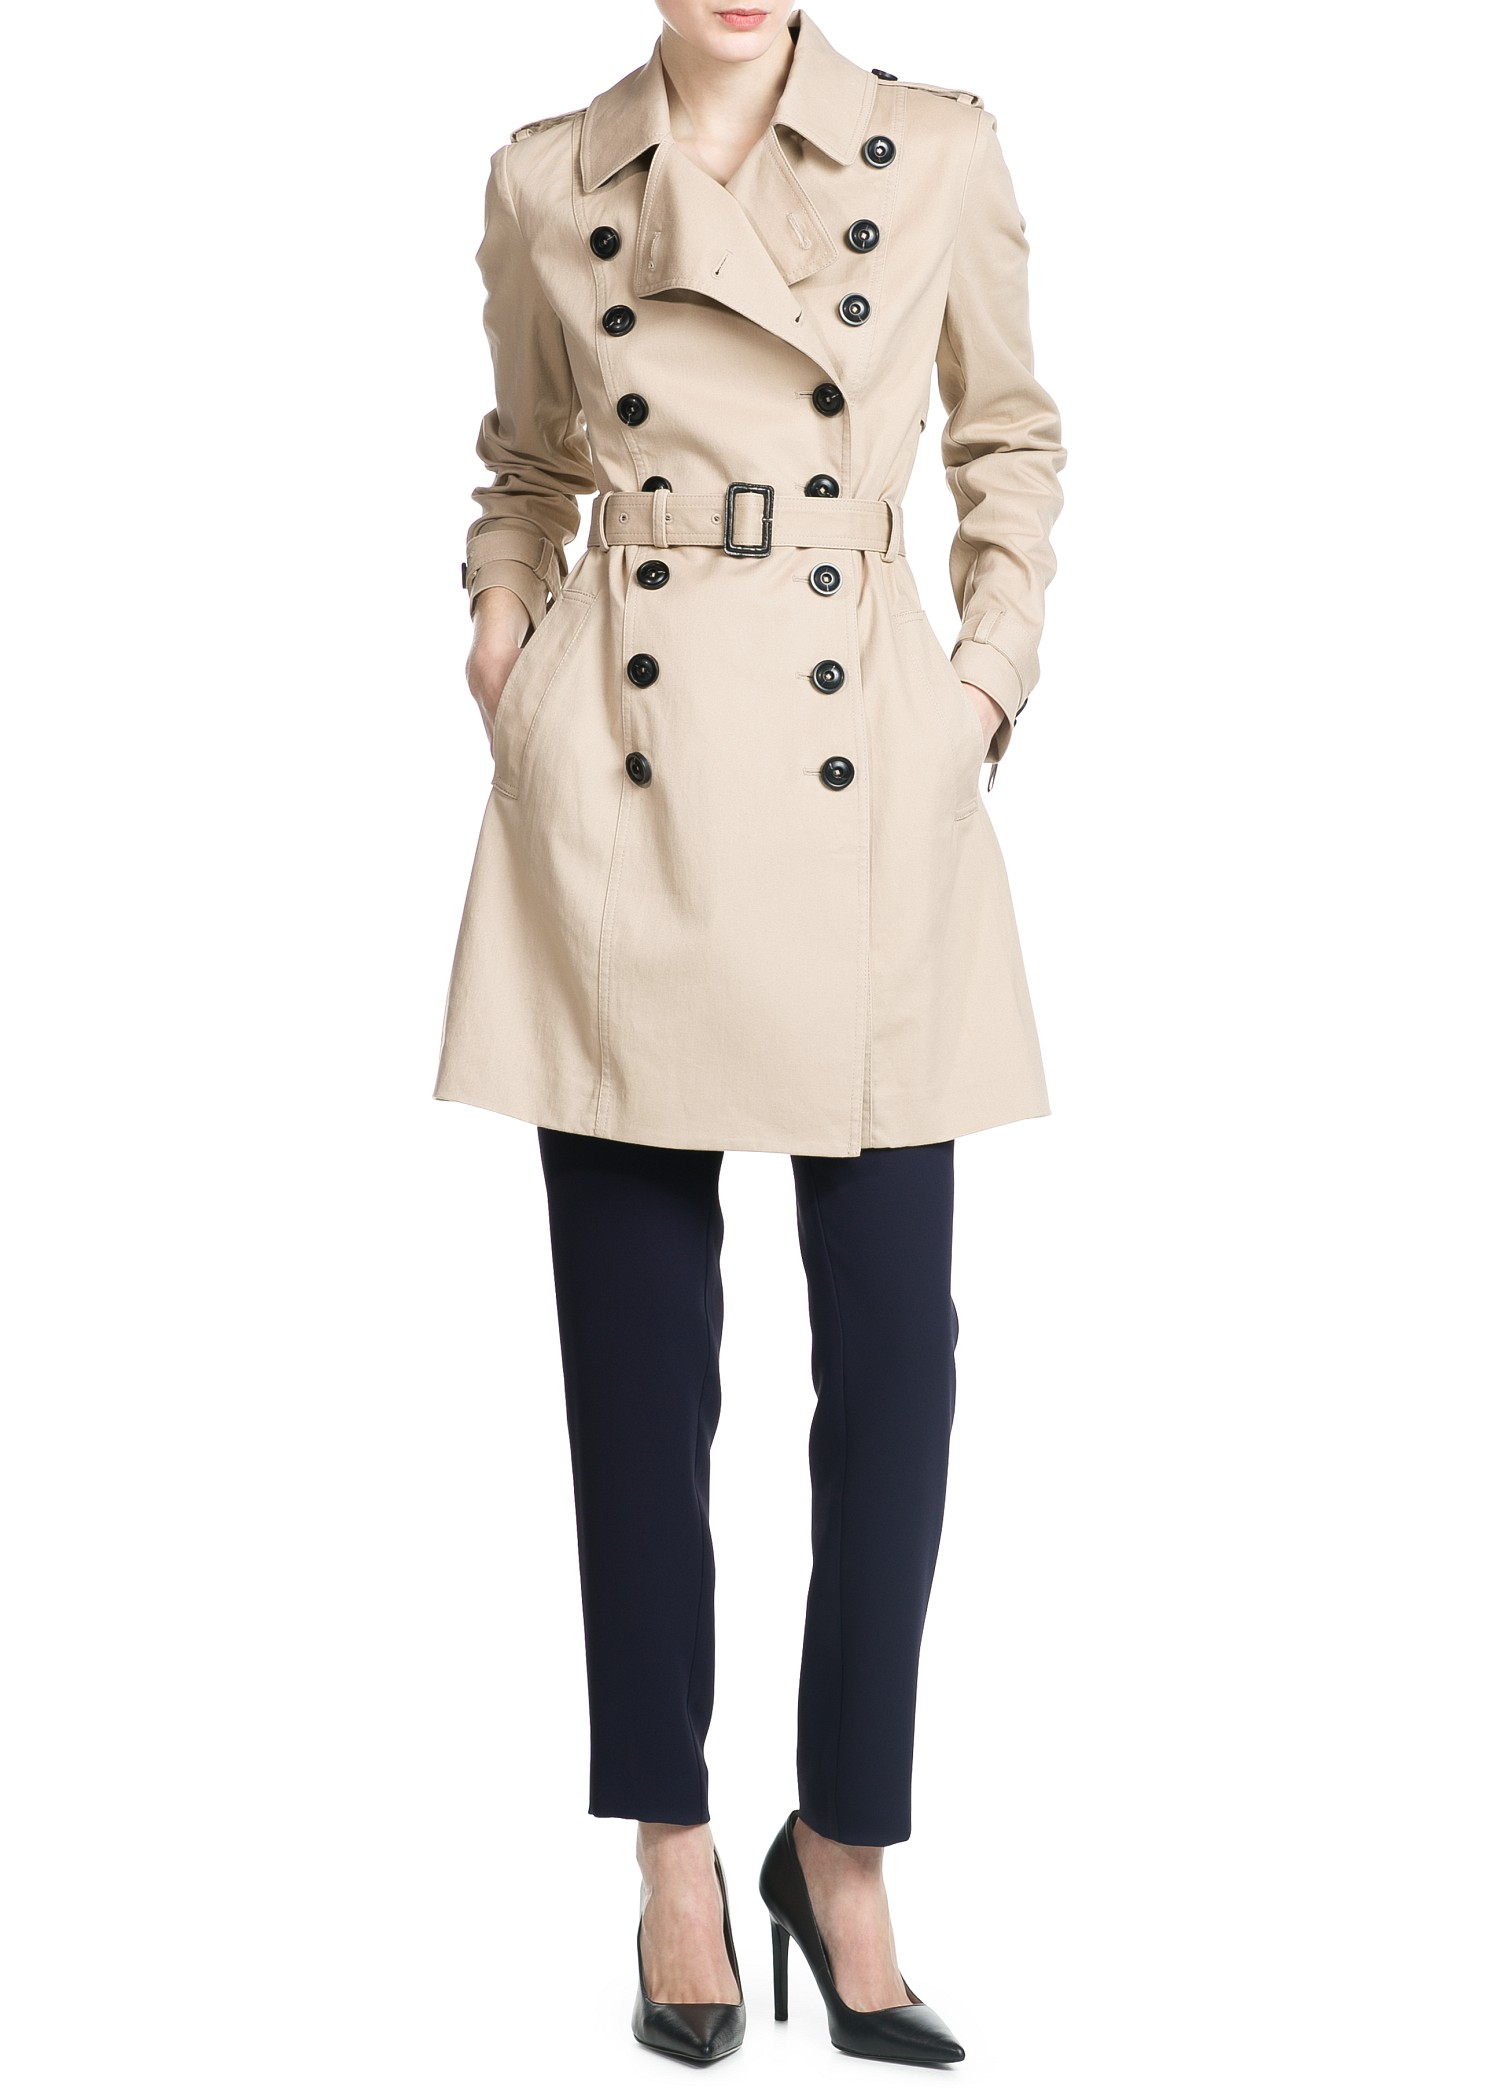 Mango Classic Cotton Trench Coat in Natural - Lyst